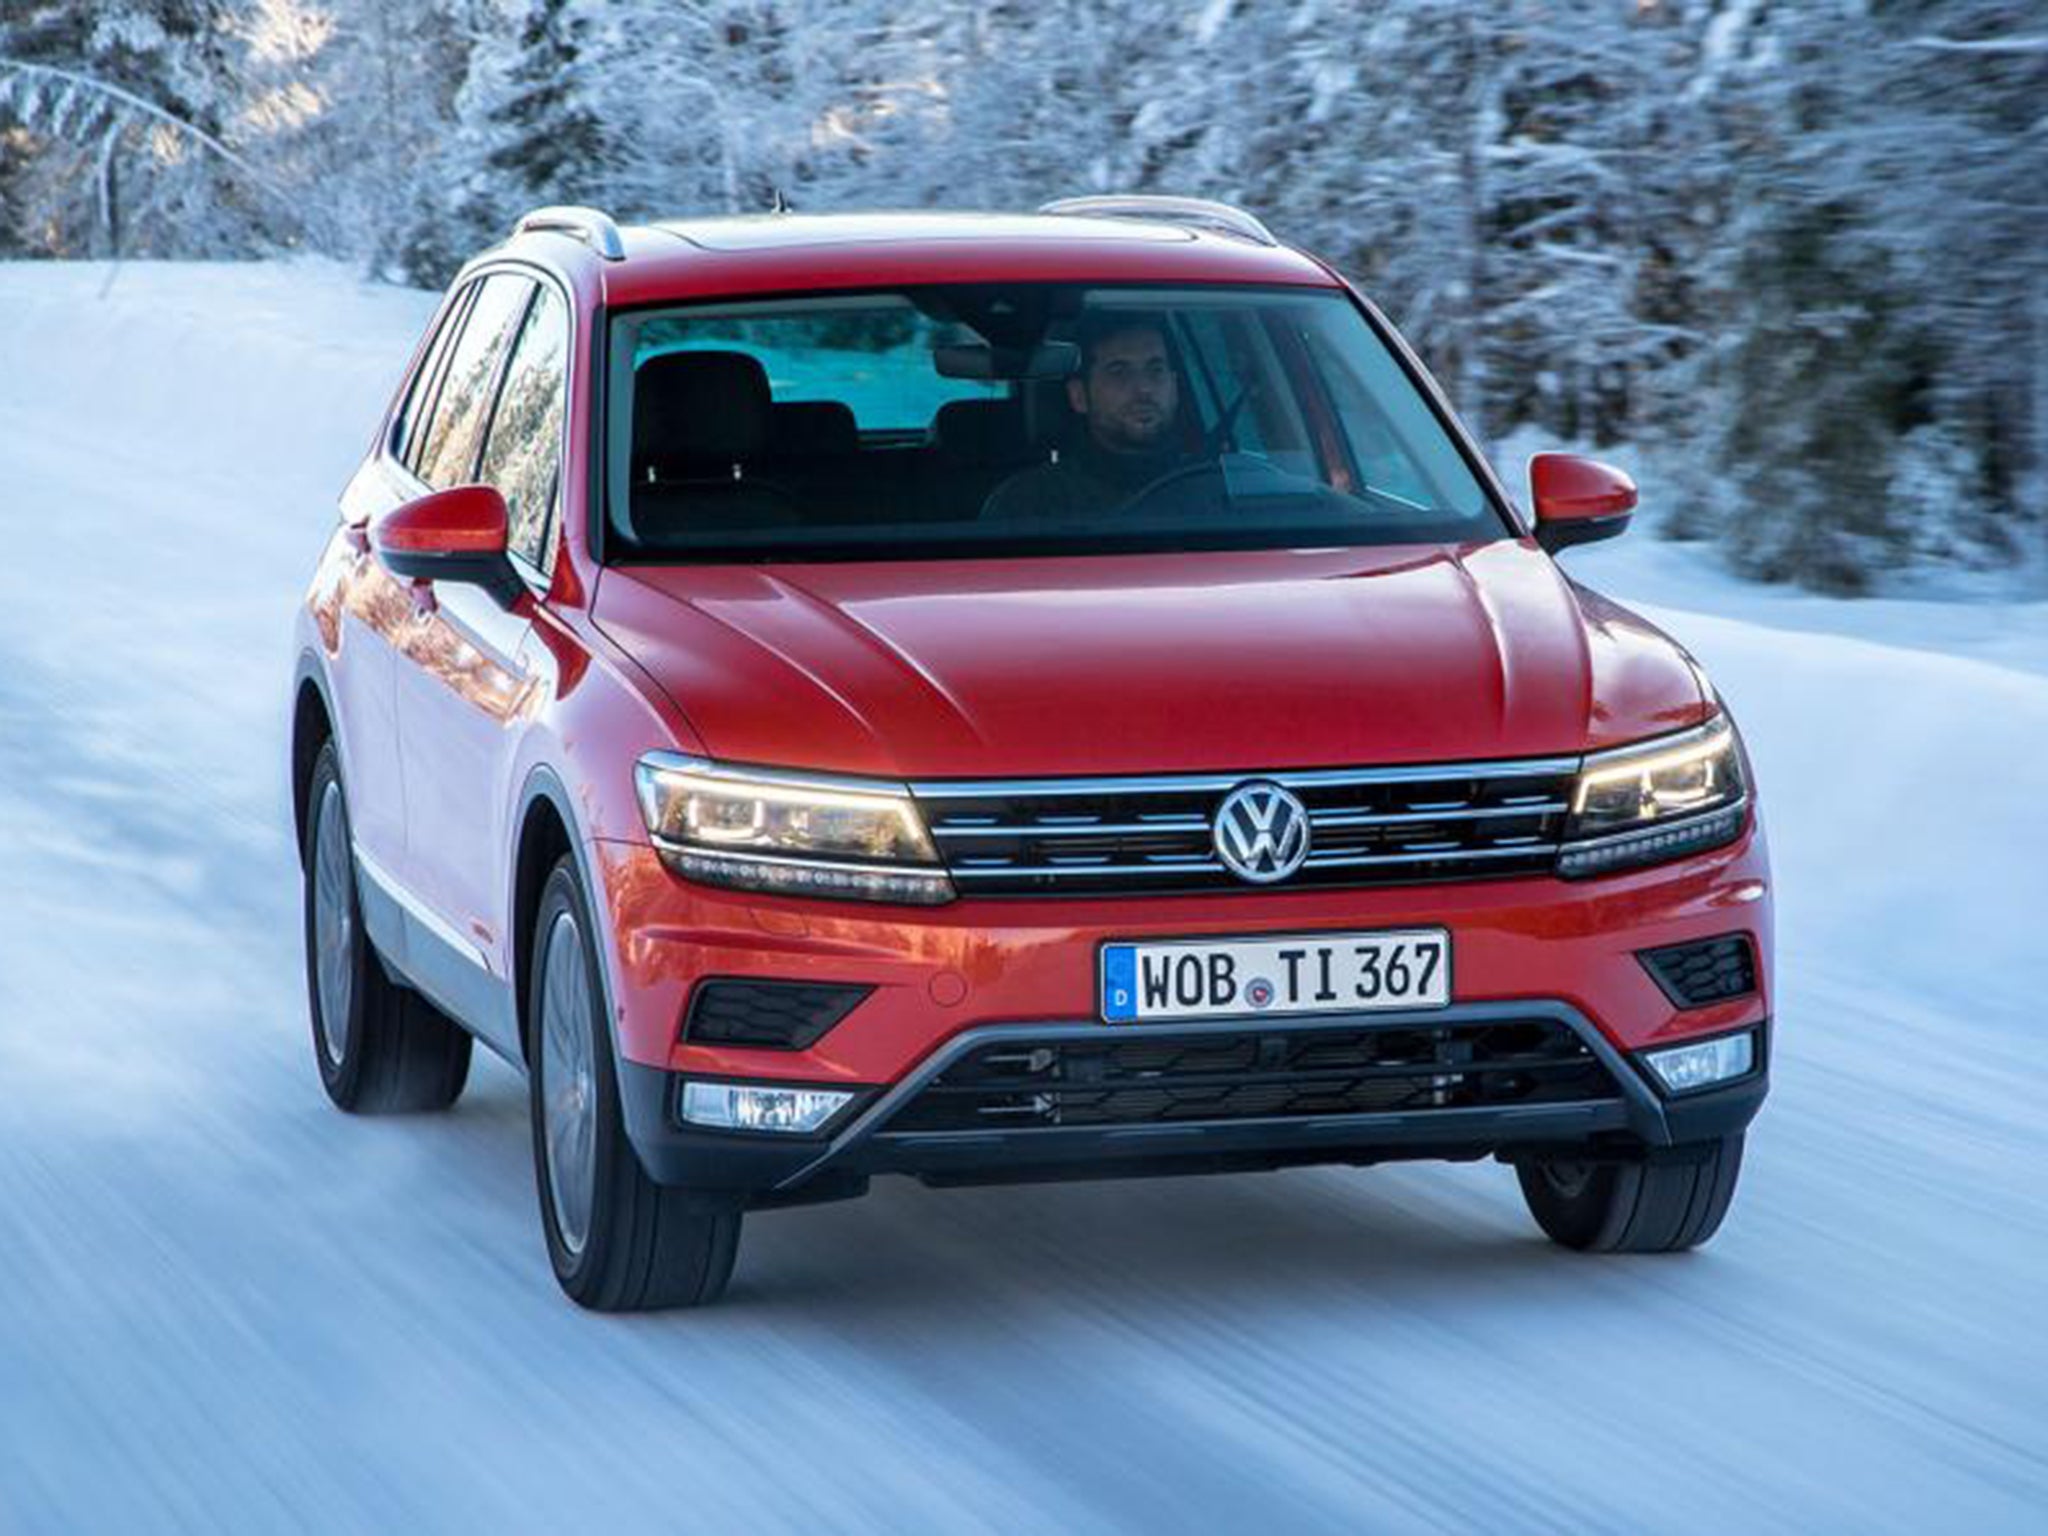 The Tiguan is based on the new MQB platform, which proves its worth